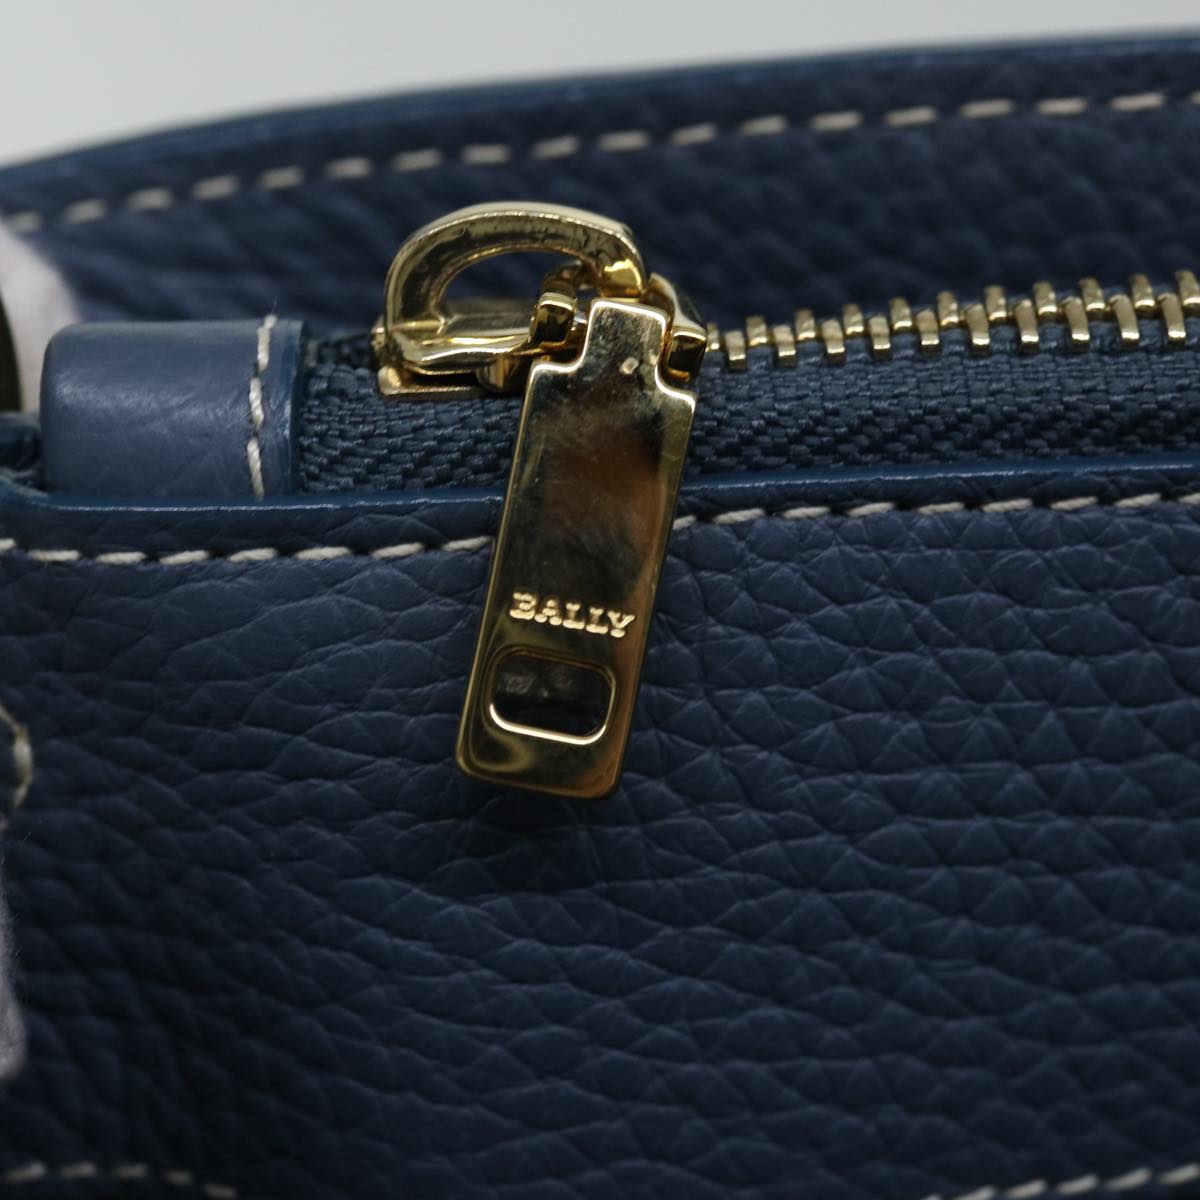 BALLY Hand Bag Leather 2way Blue Auth yk11079